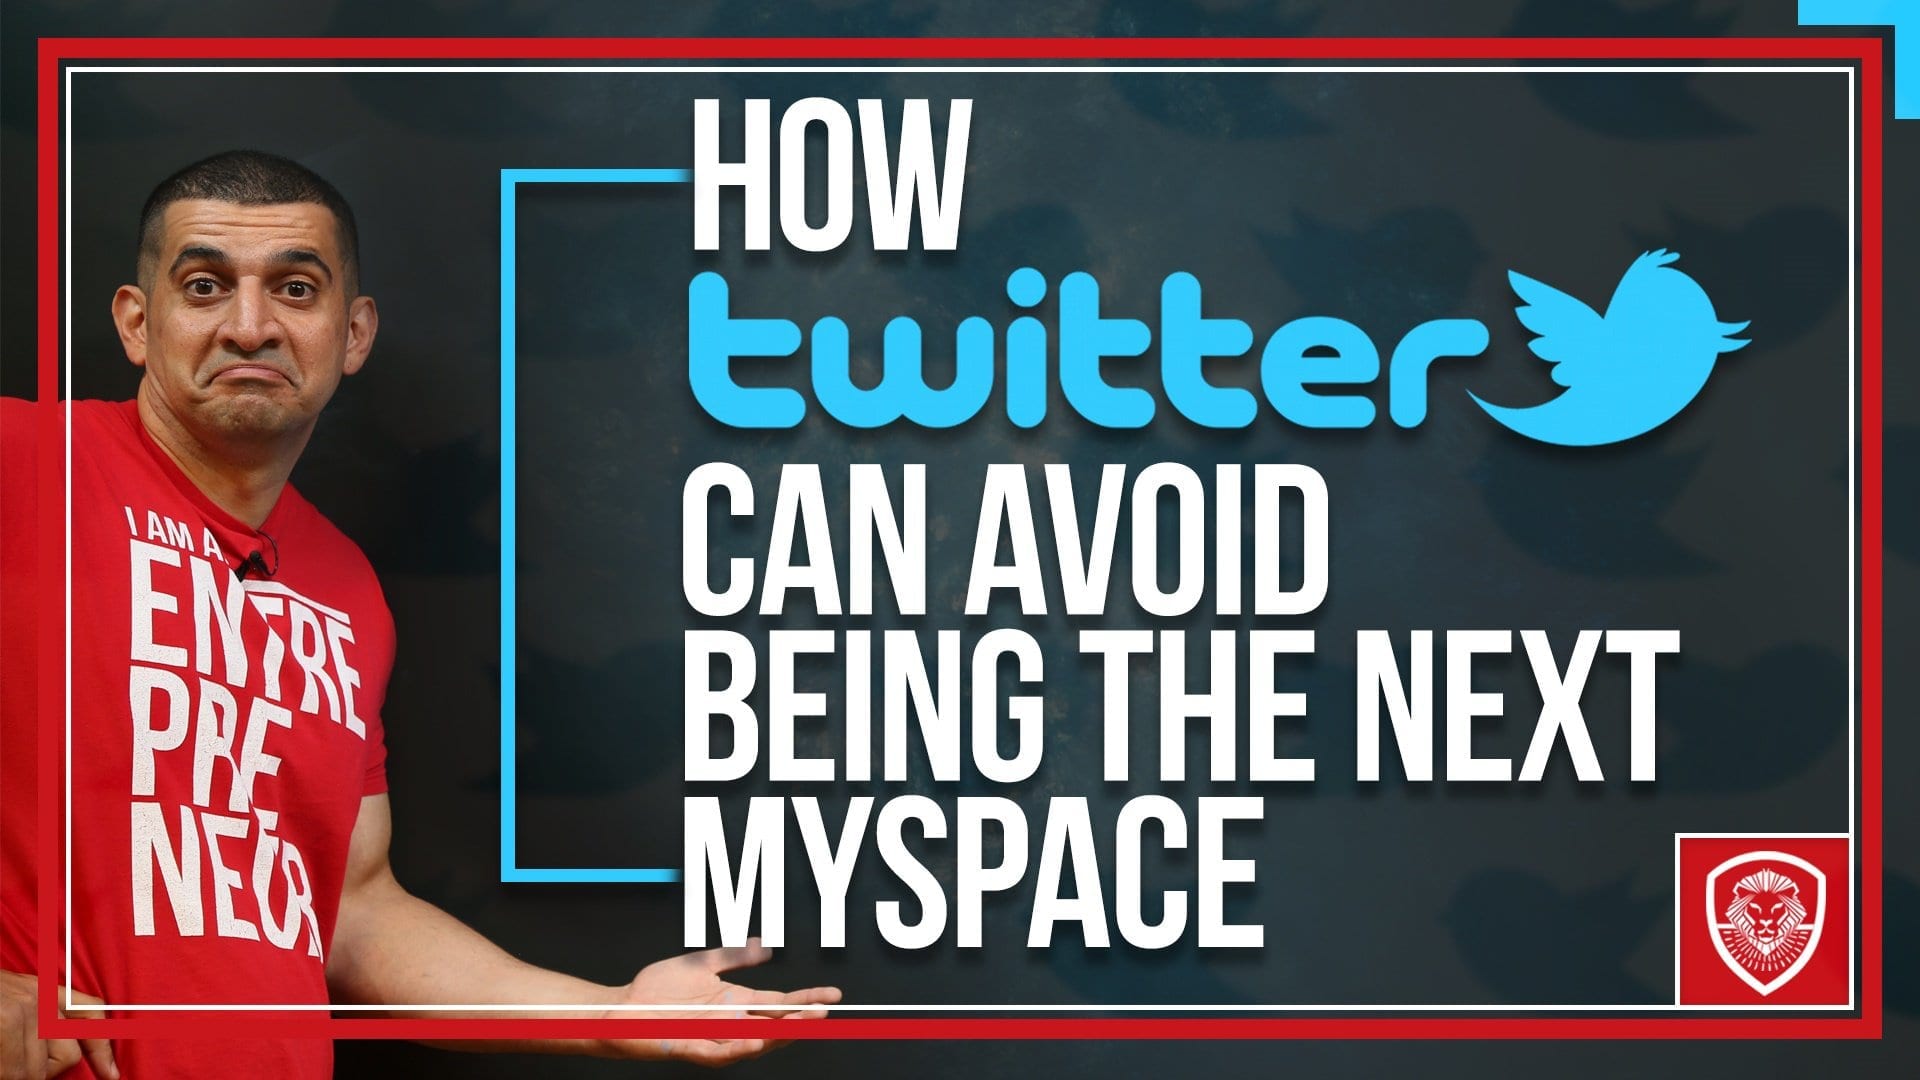 Will Twitter go the way of Myspace, Yahoo! and other companies that have faltered? Here's how Twitter can avoid being the next Myspace.